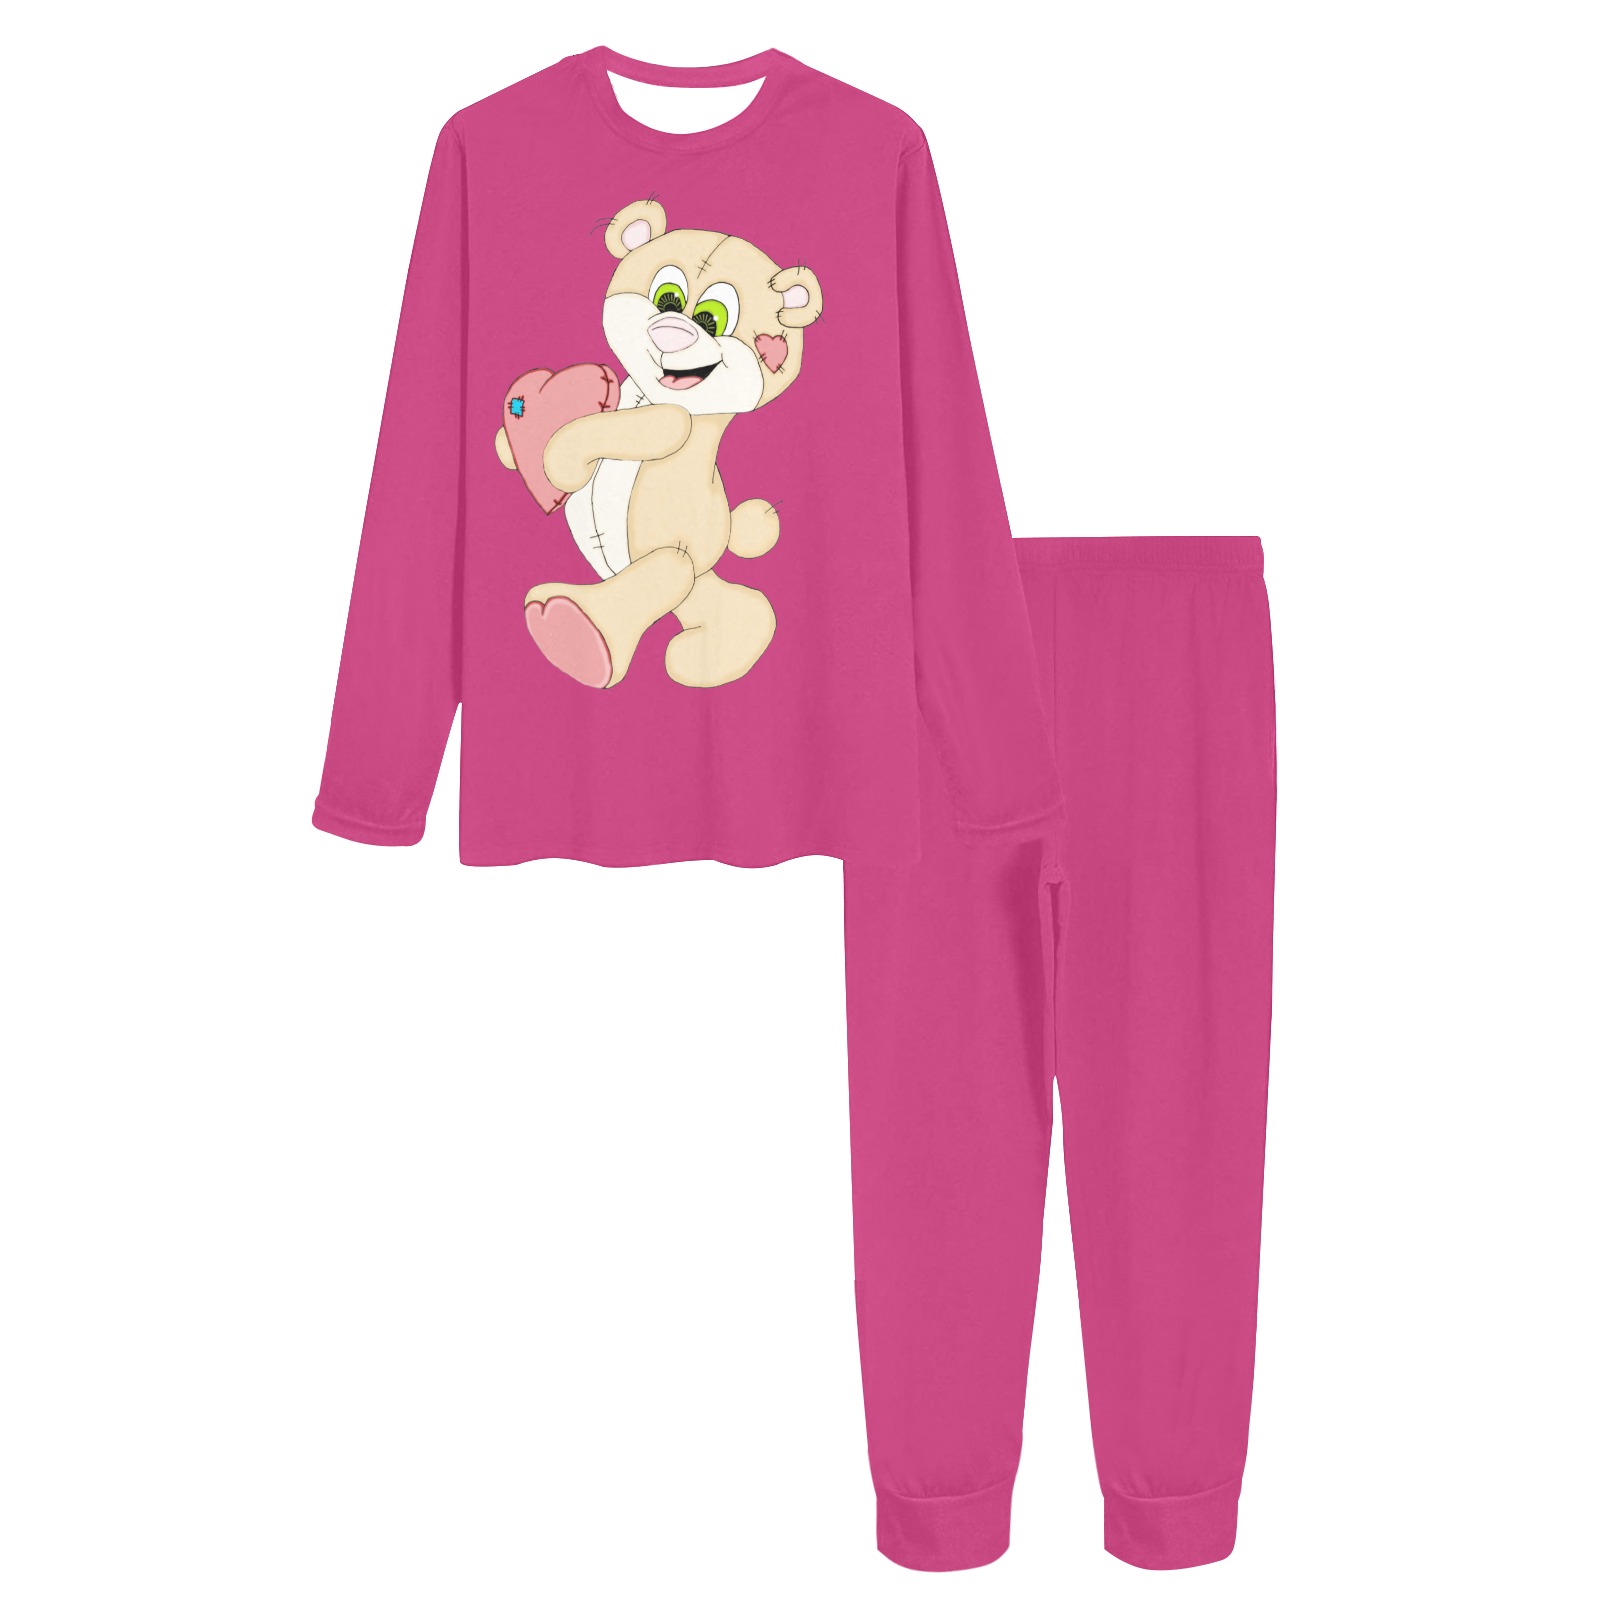 Patchwork Heart Teddy Hot Pink Women's All Over Print Pajama Set